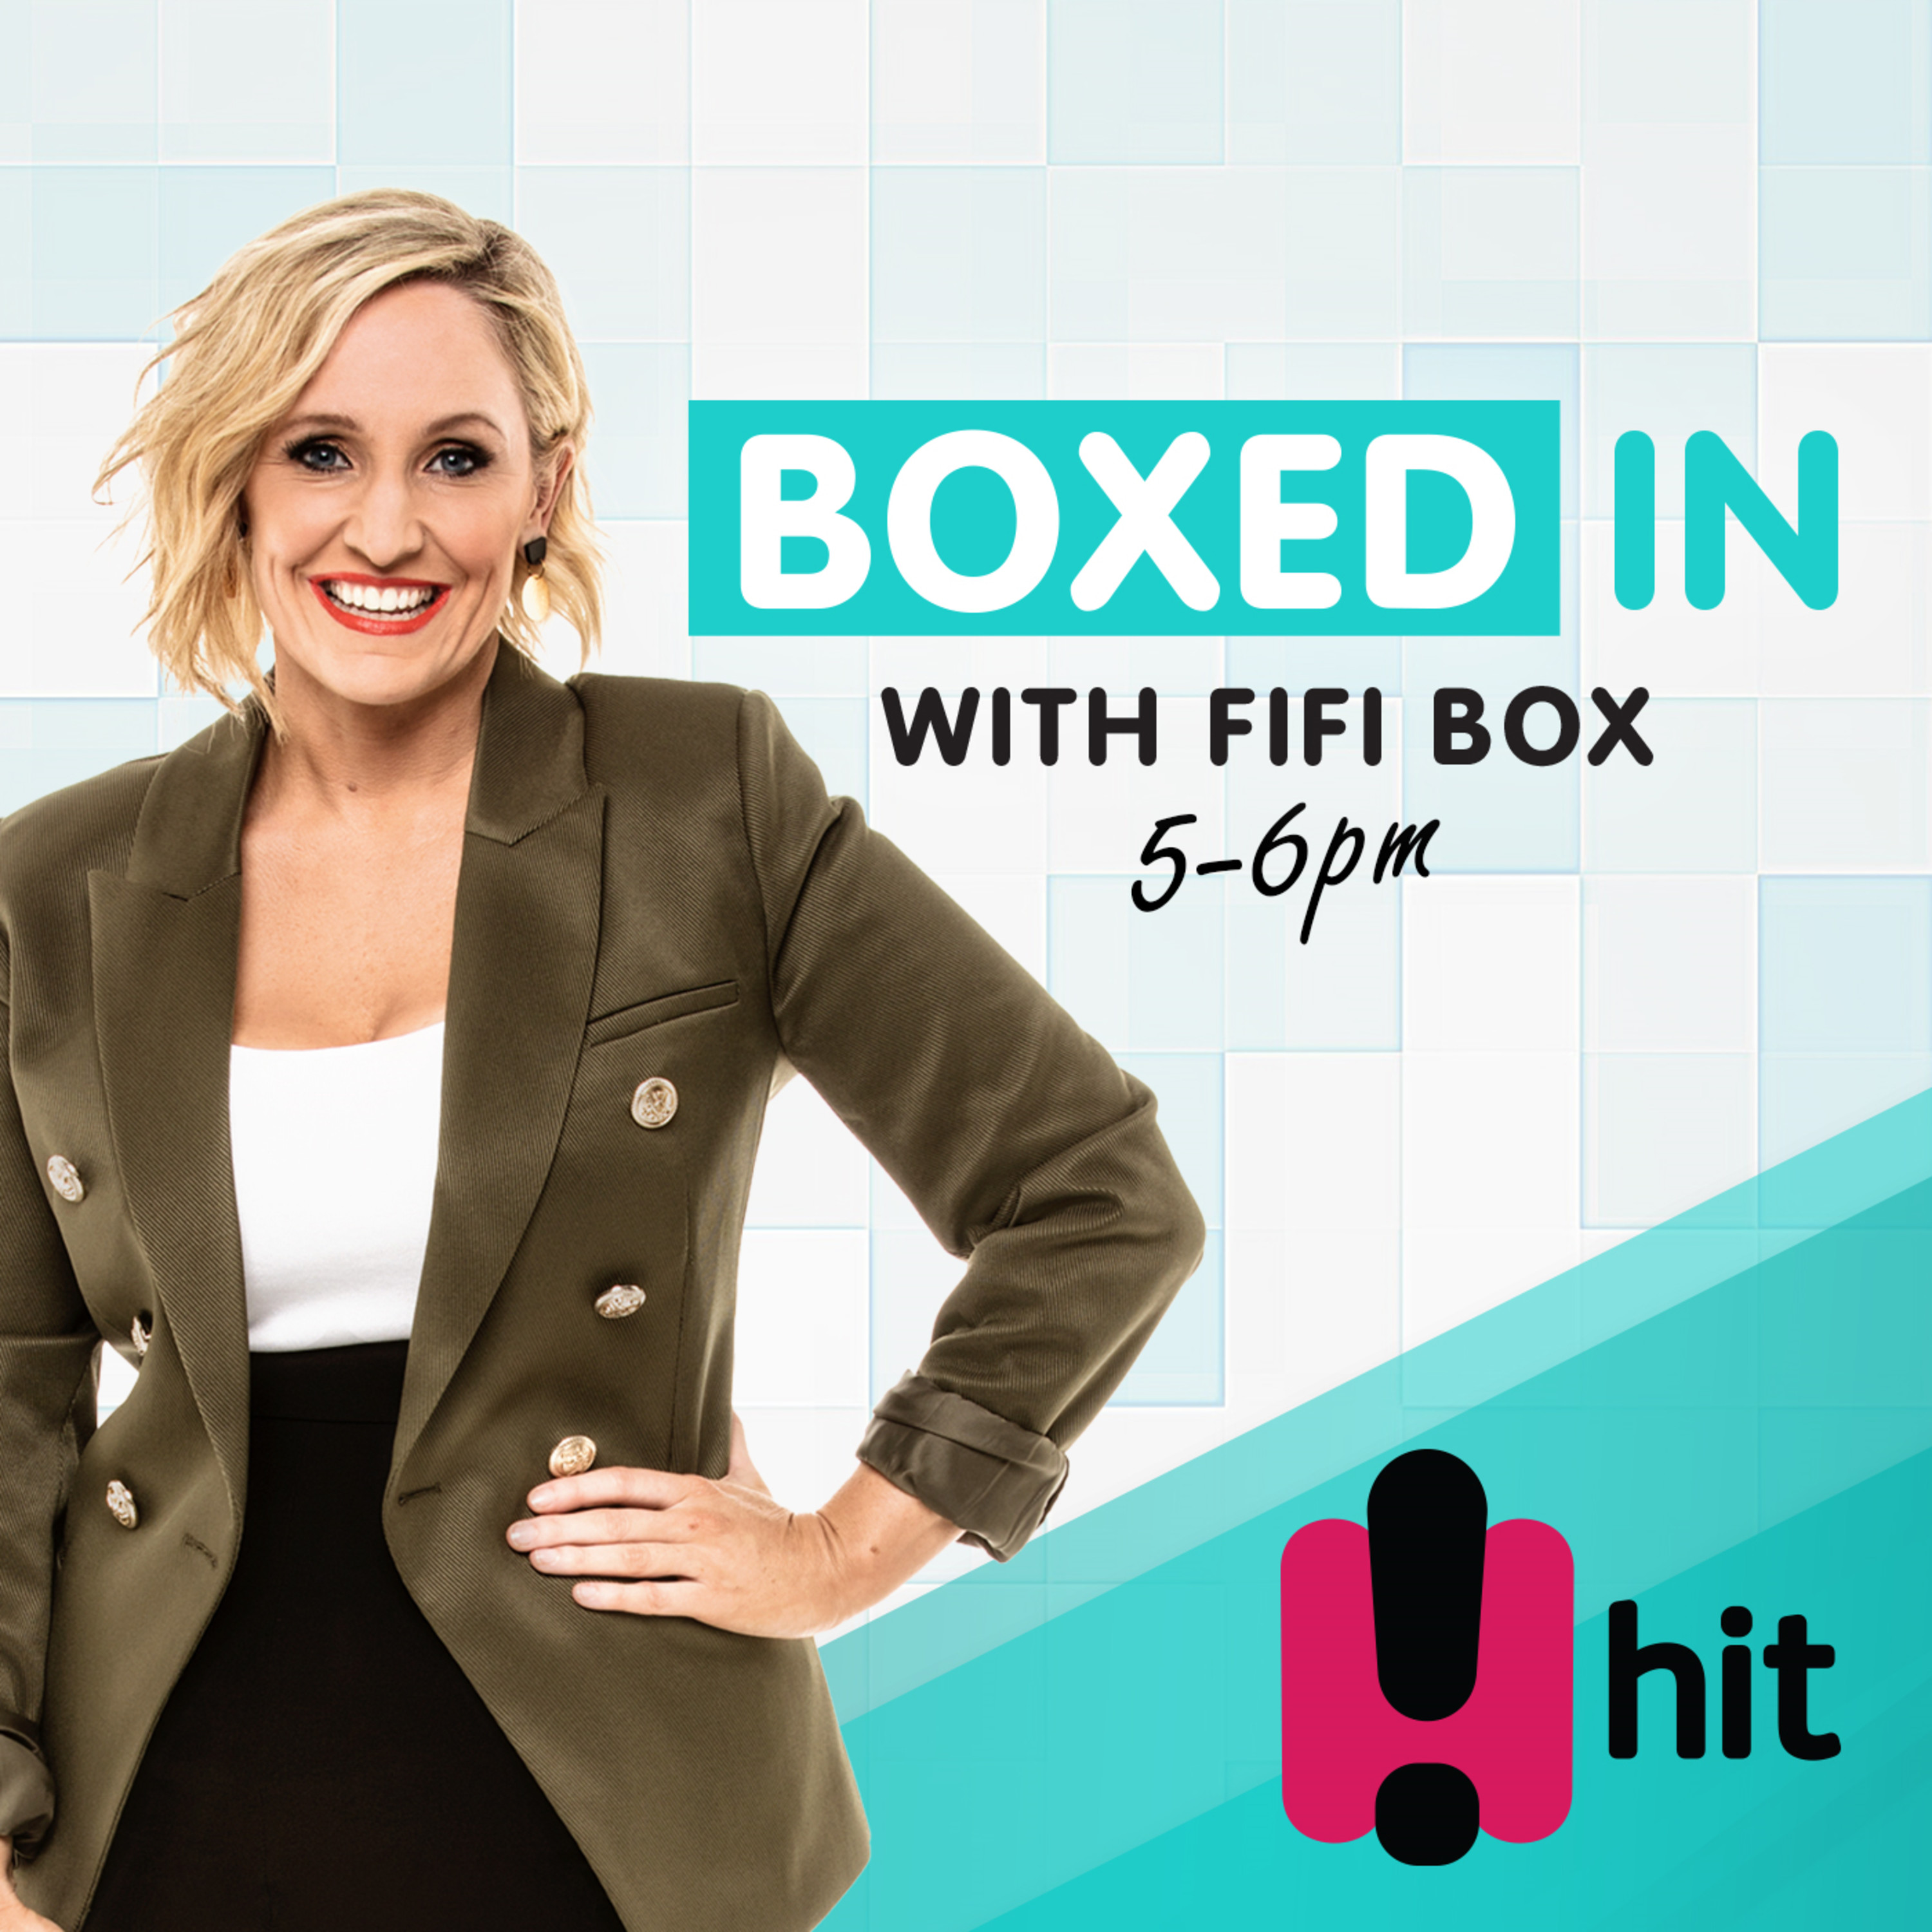 The Boxed In with Fifi Box Catch Up